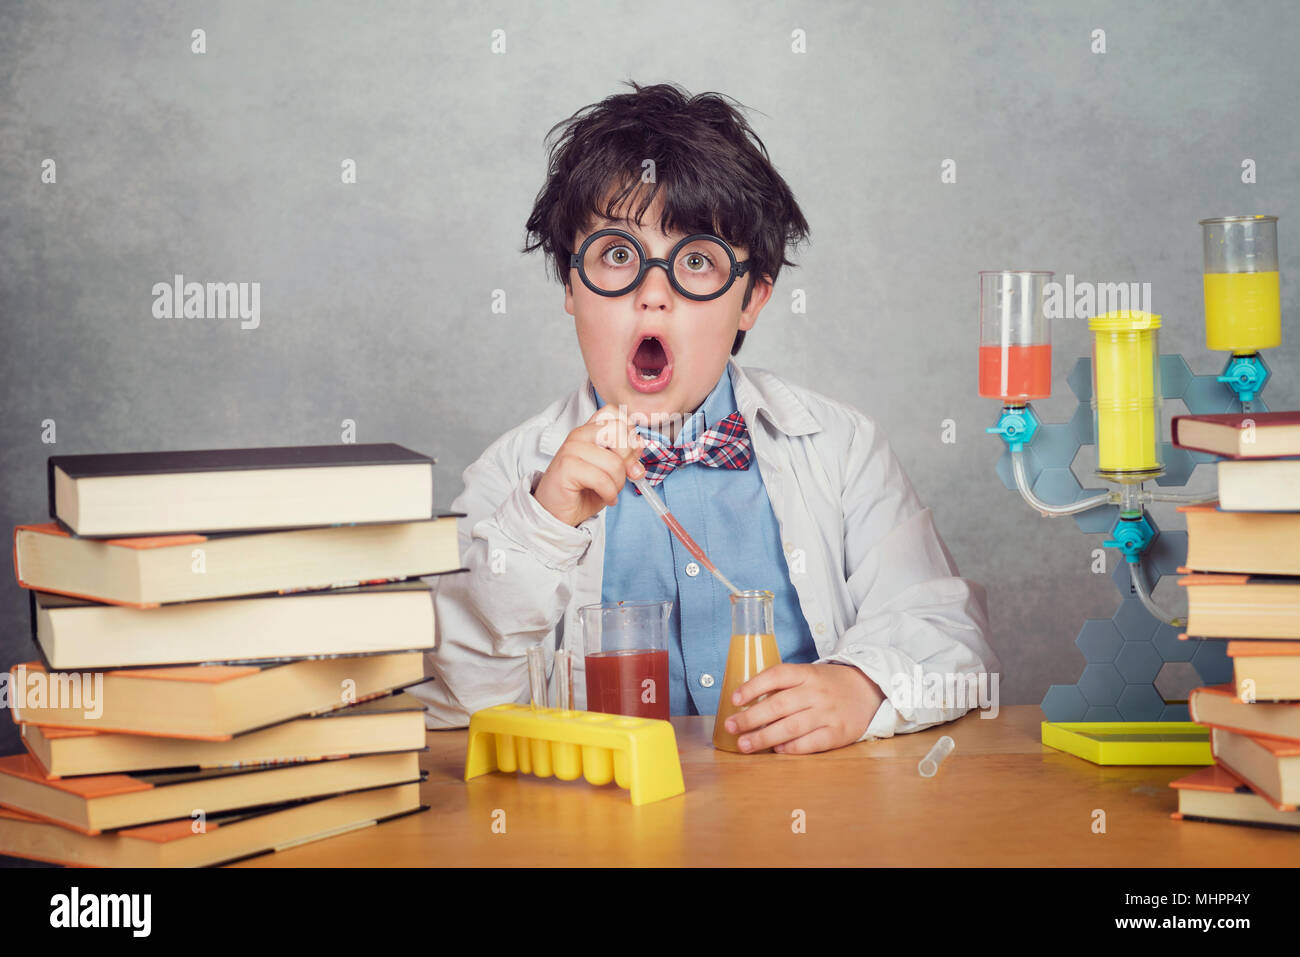 boy is making science experiments in a laboratory on gray background Stock Photo